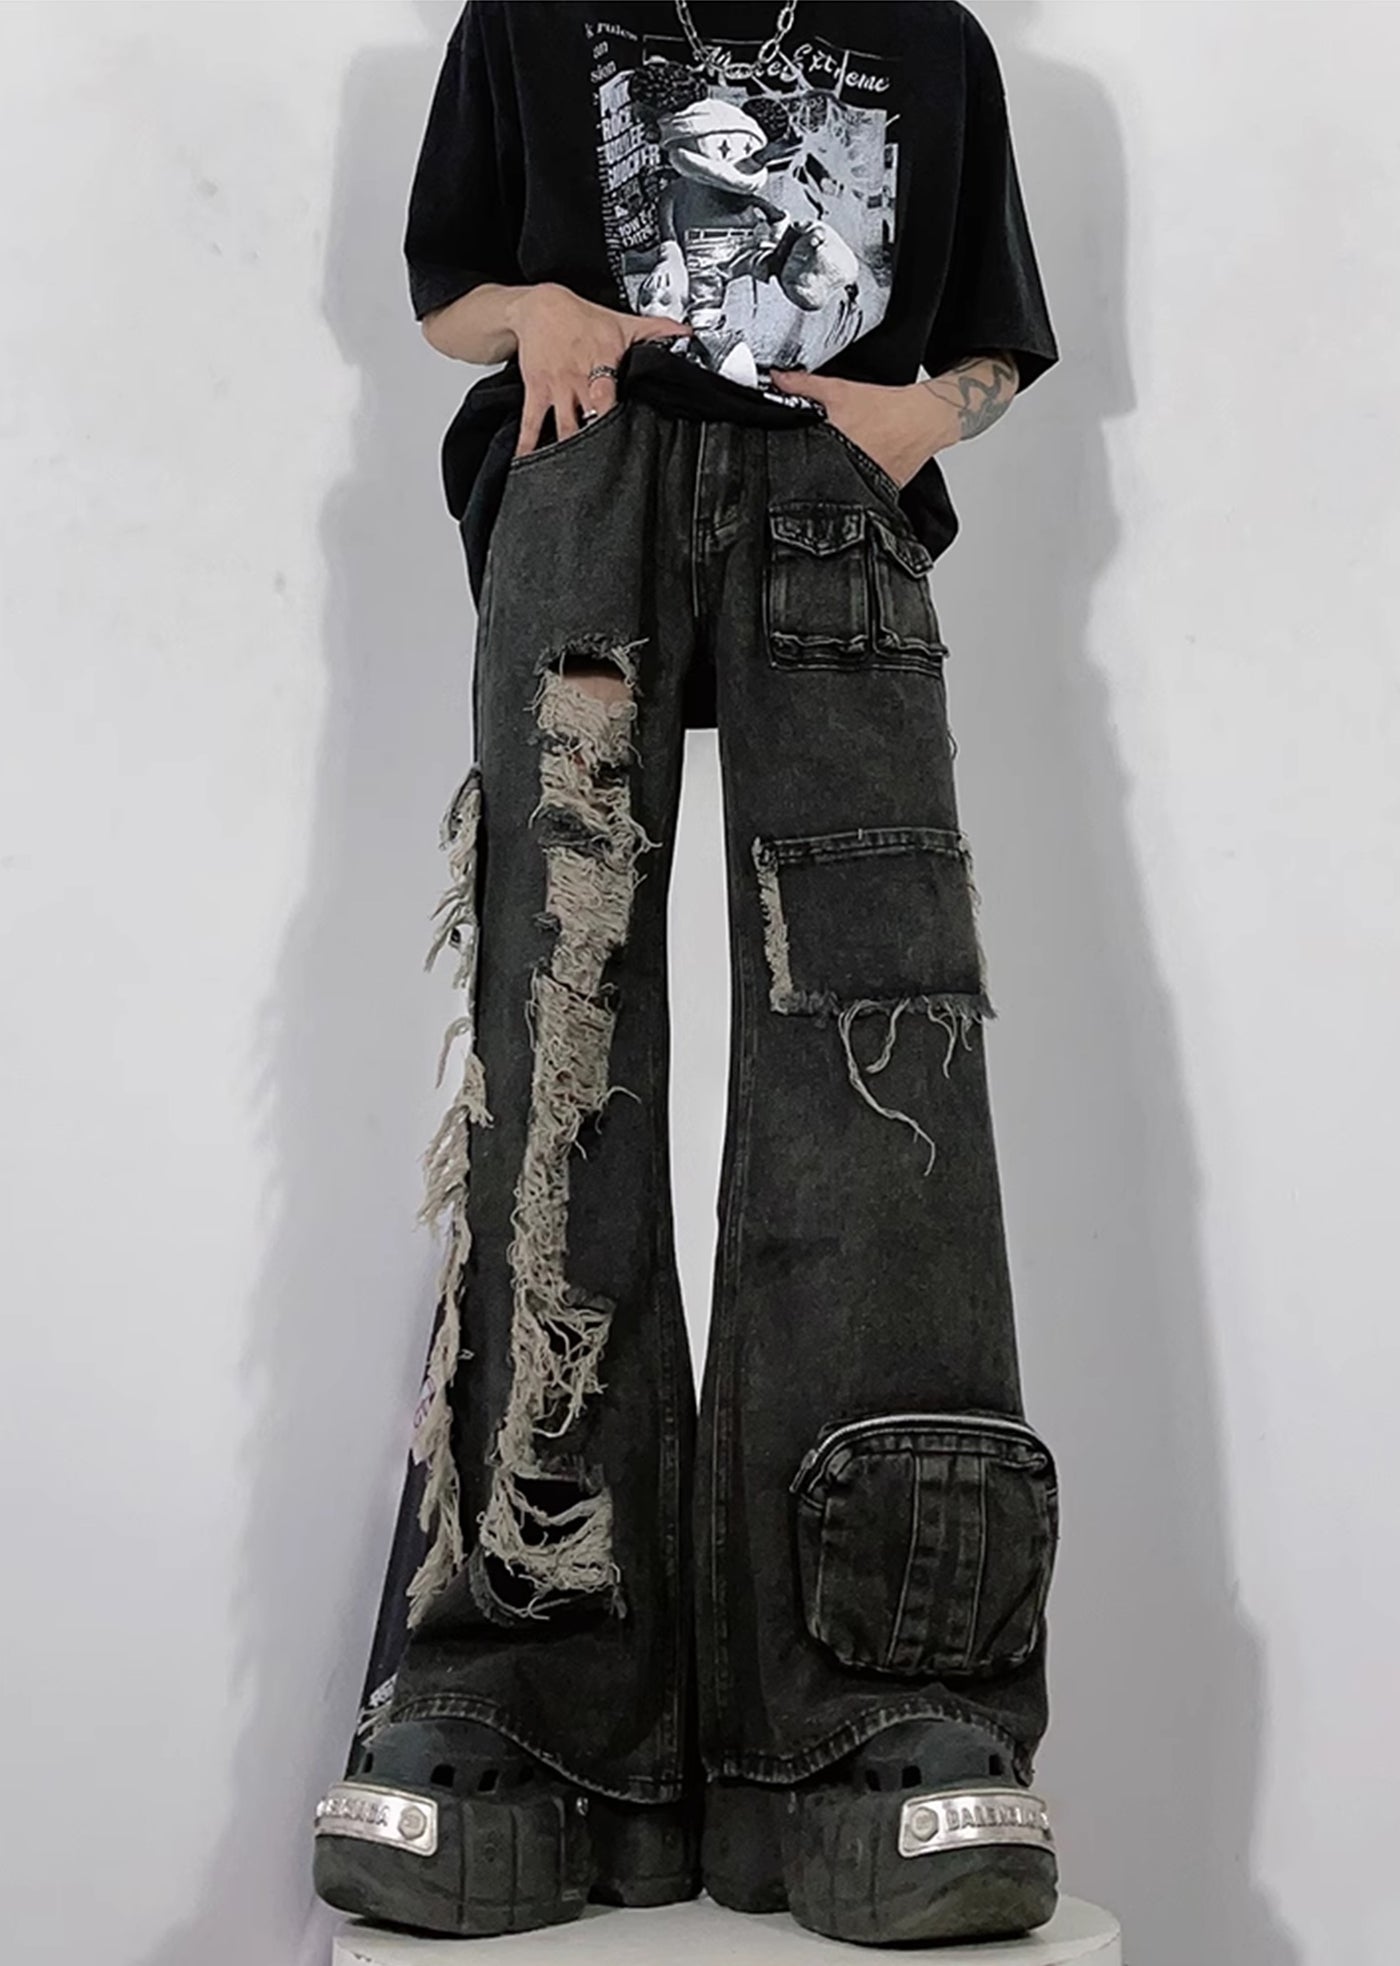 【76street】Left and right design wide cargo distressed silhouette denim pants  ST0001